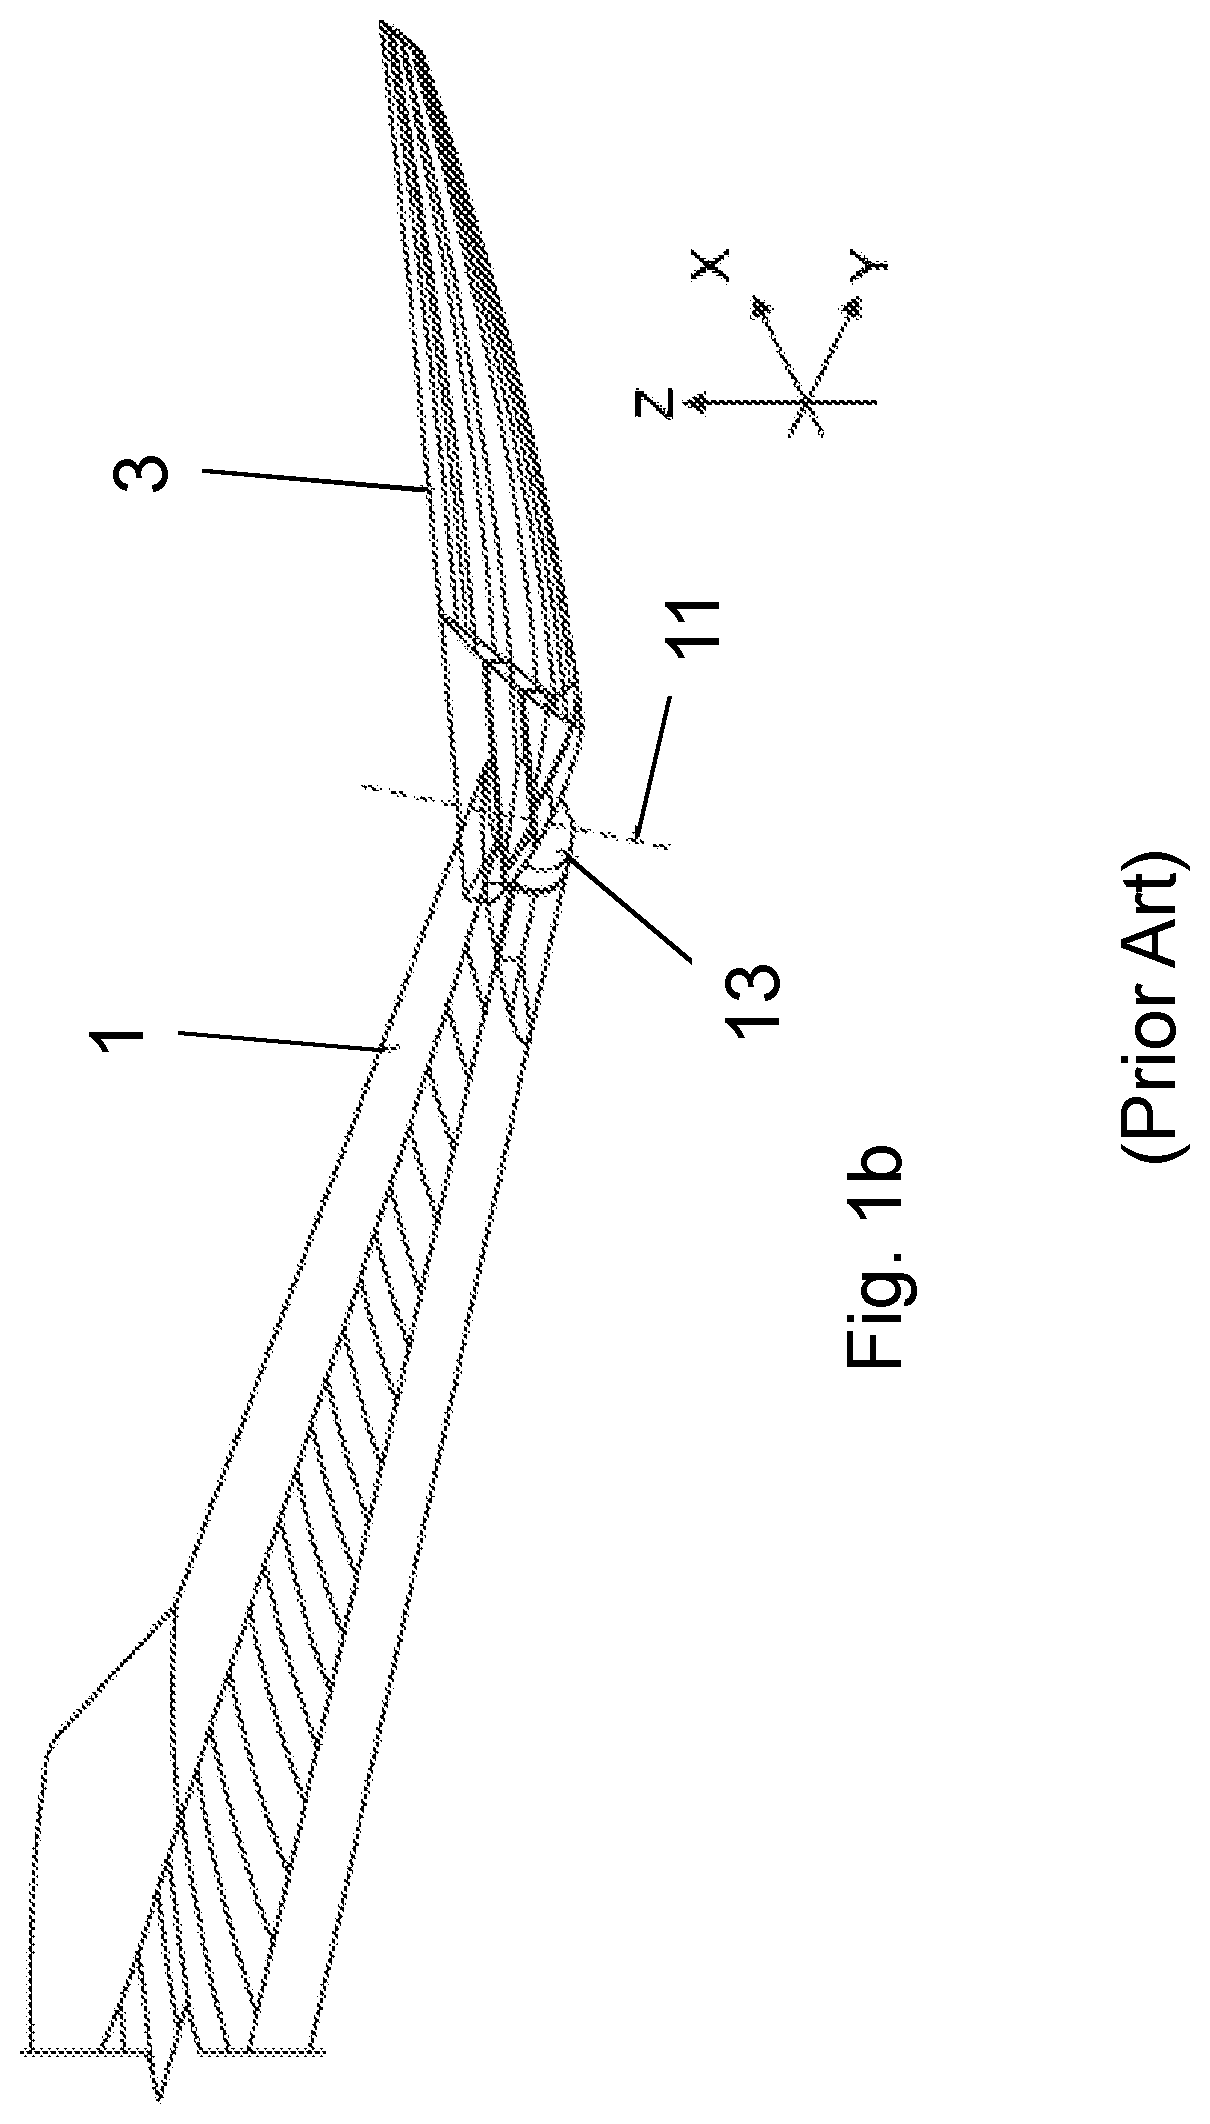 Curved interface between an outer end of a wing and a moveable wing tip device